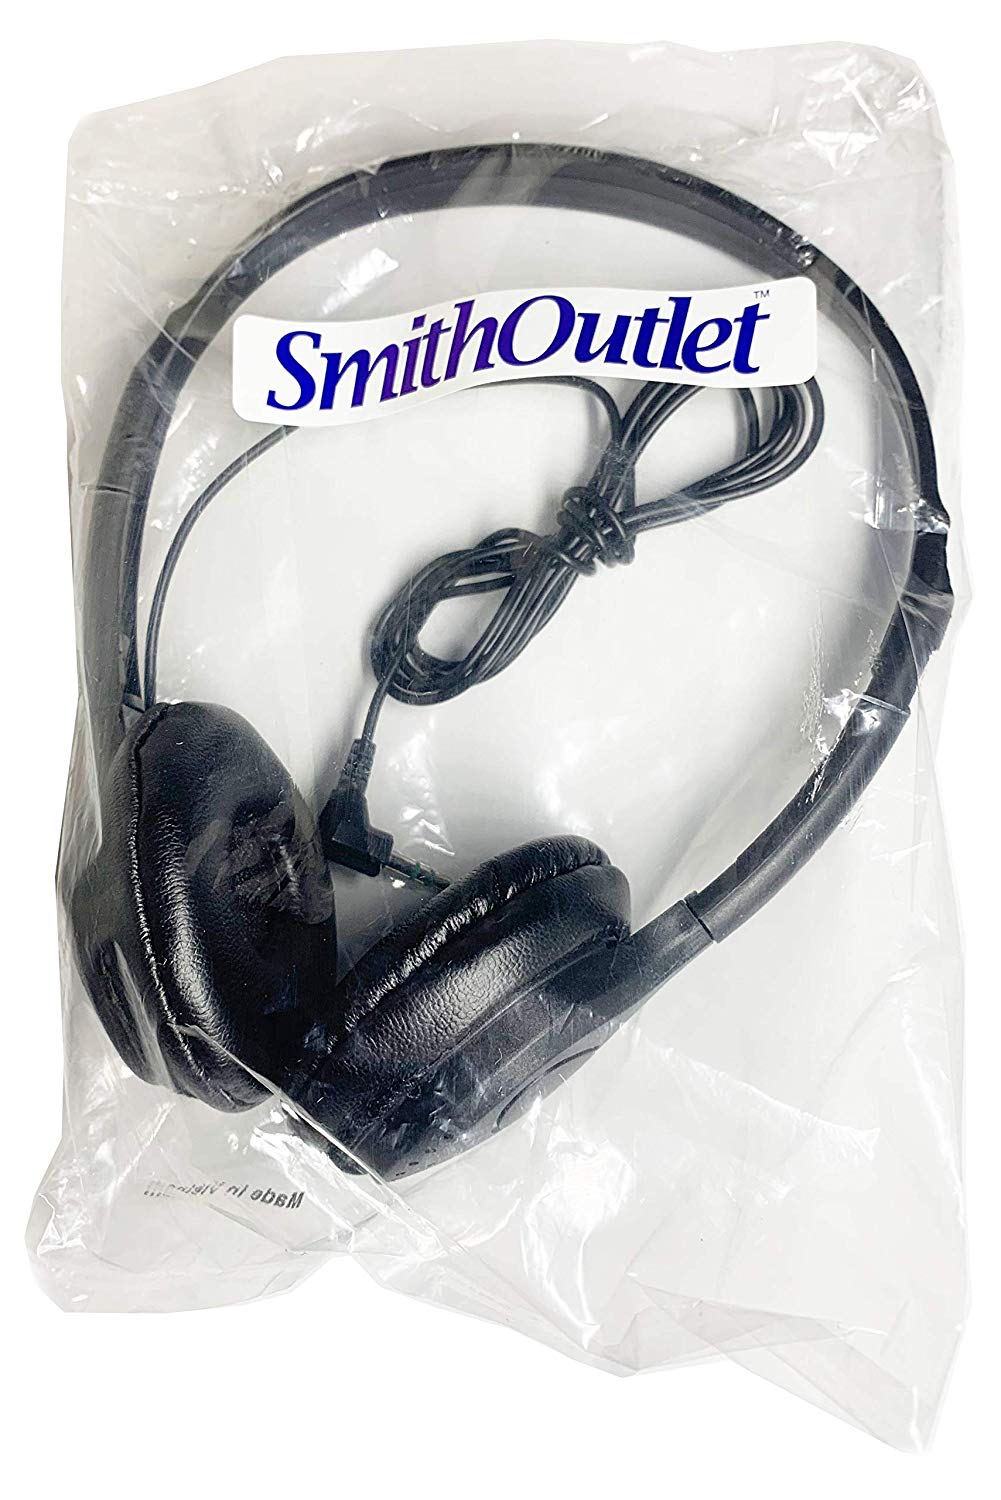 SmithOutlet headphones with soft leatherette ear cushions